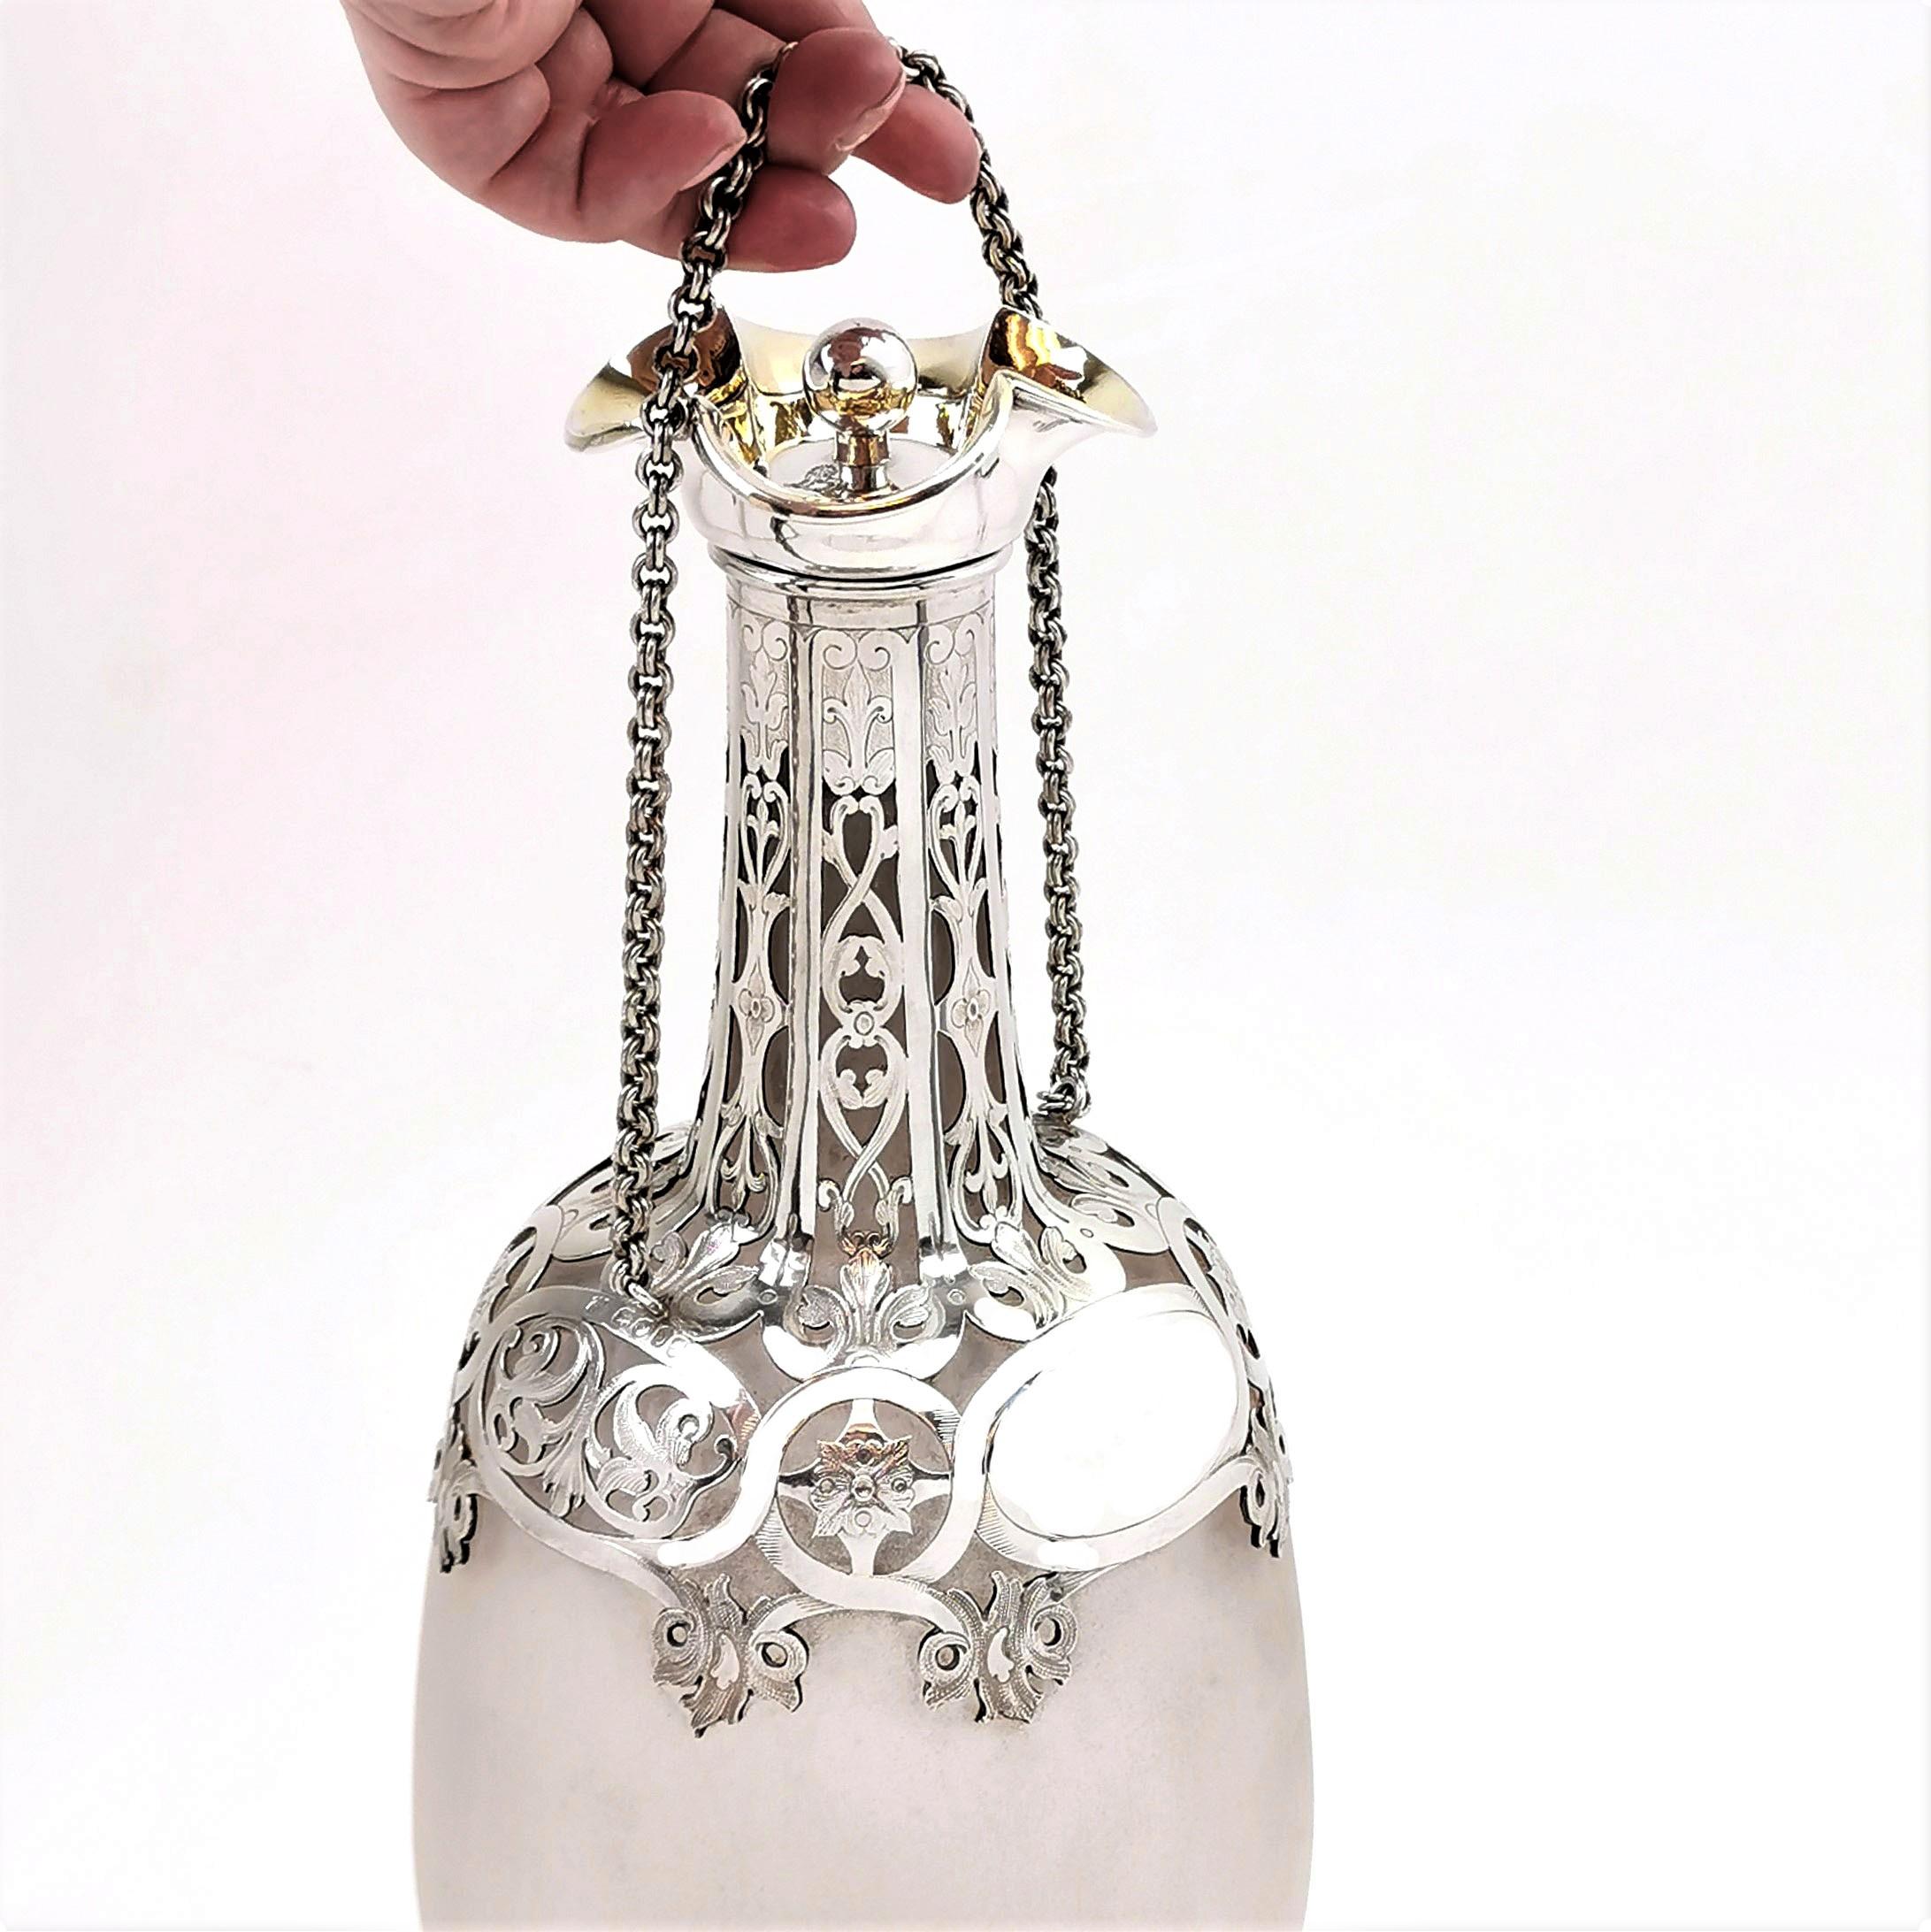 English Antique Victorian Silver and Glass 'Pilgrims Flask' Decanter 1859 Wine Whisky